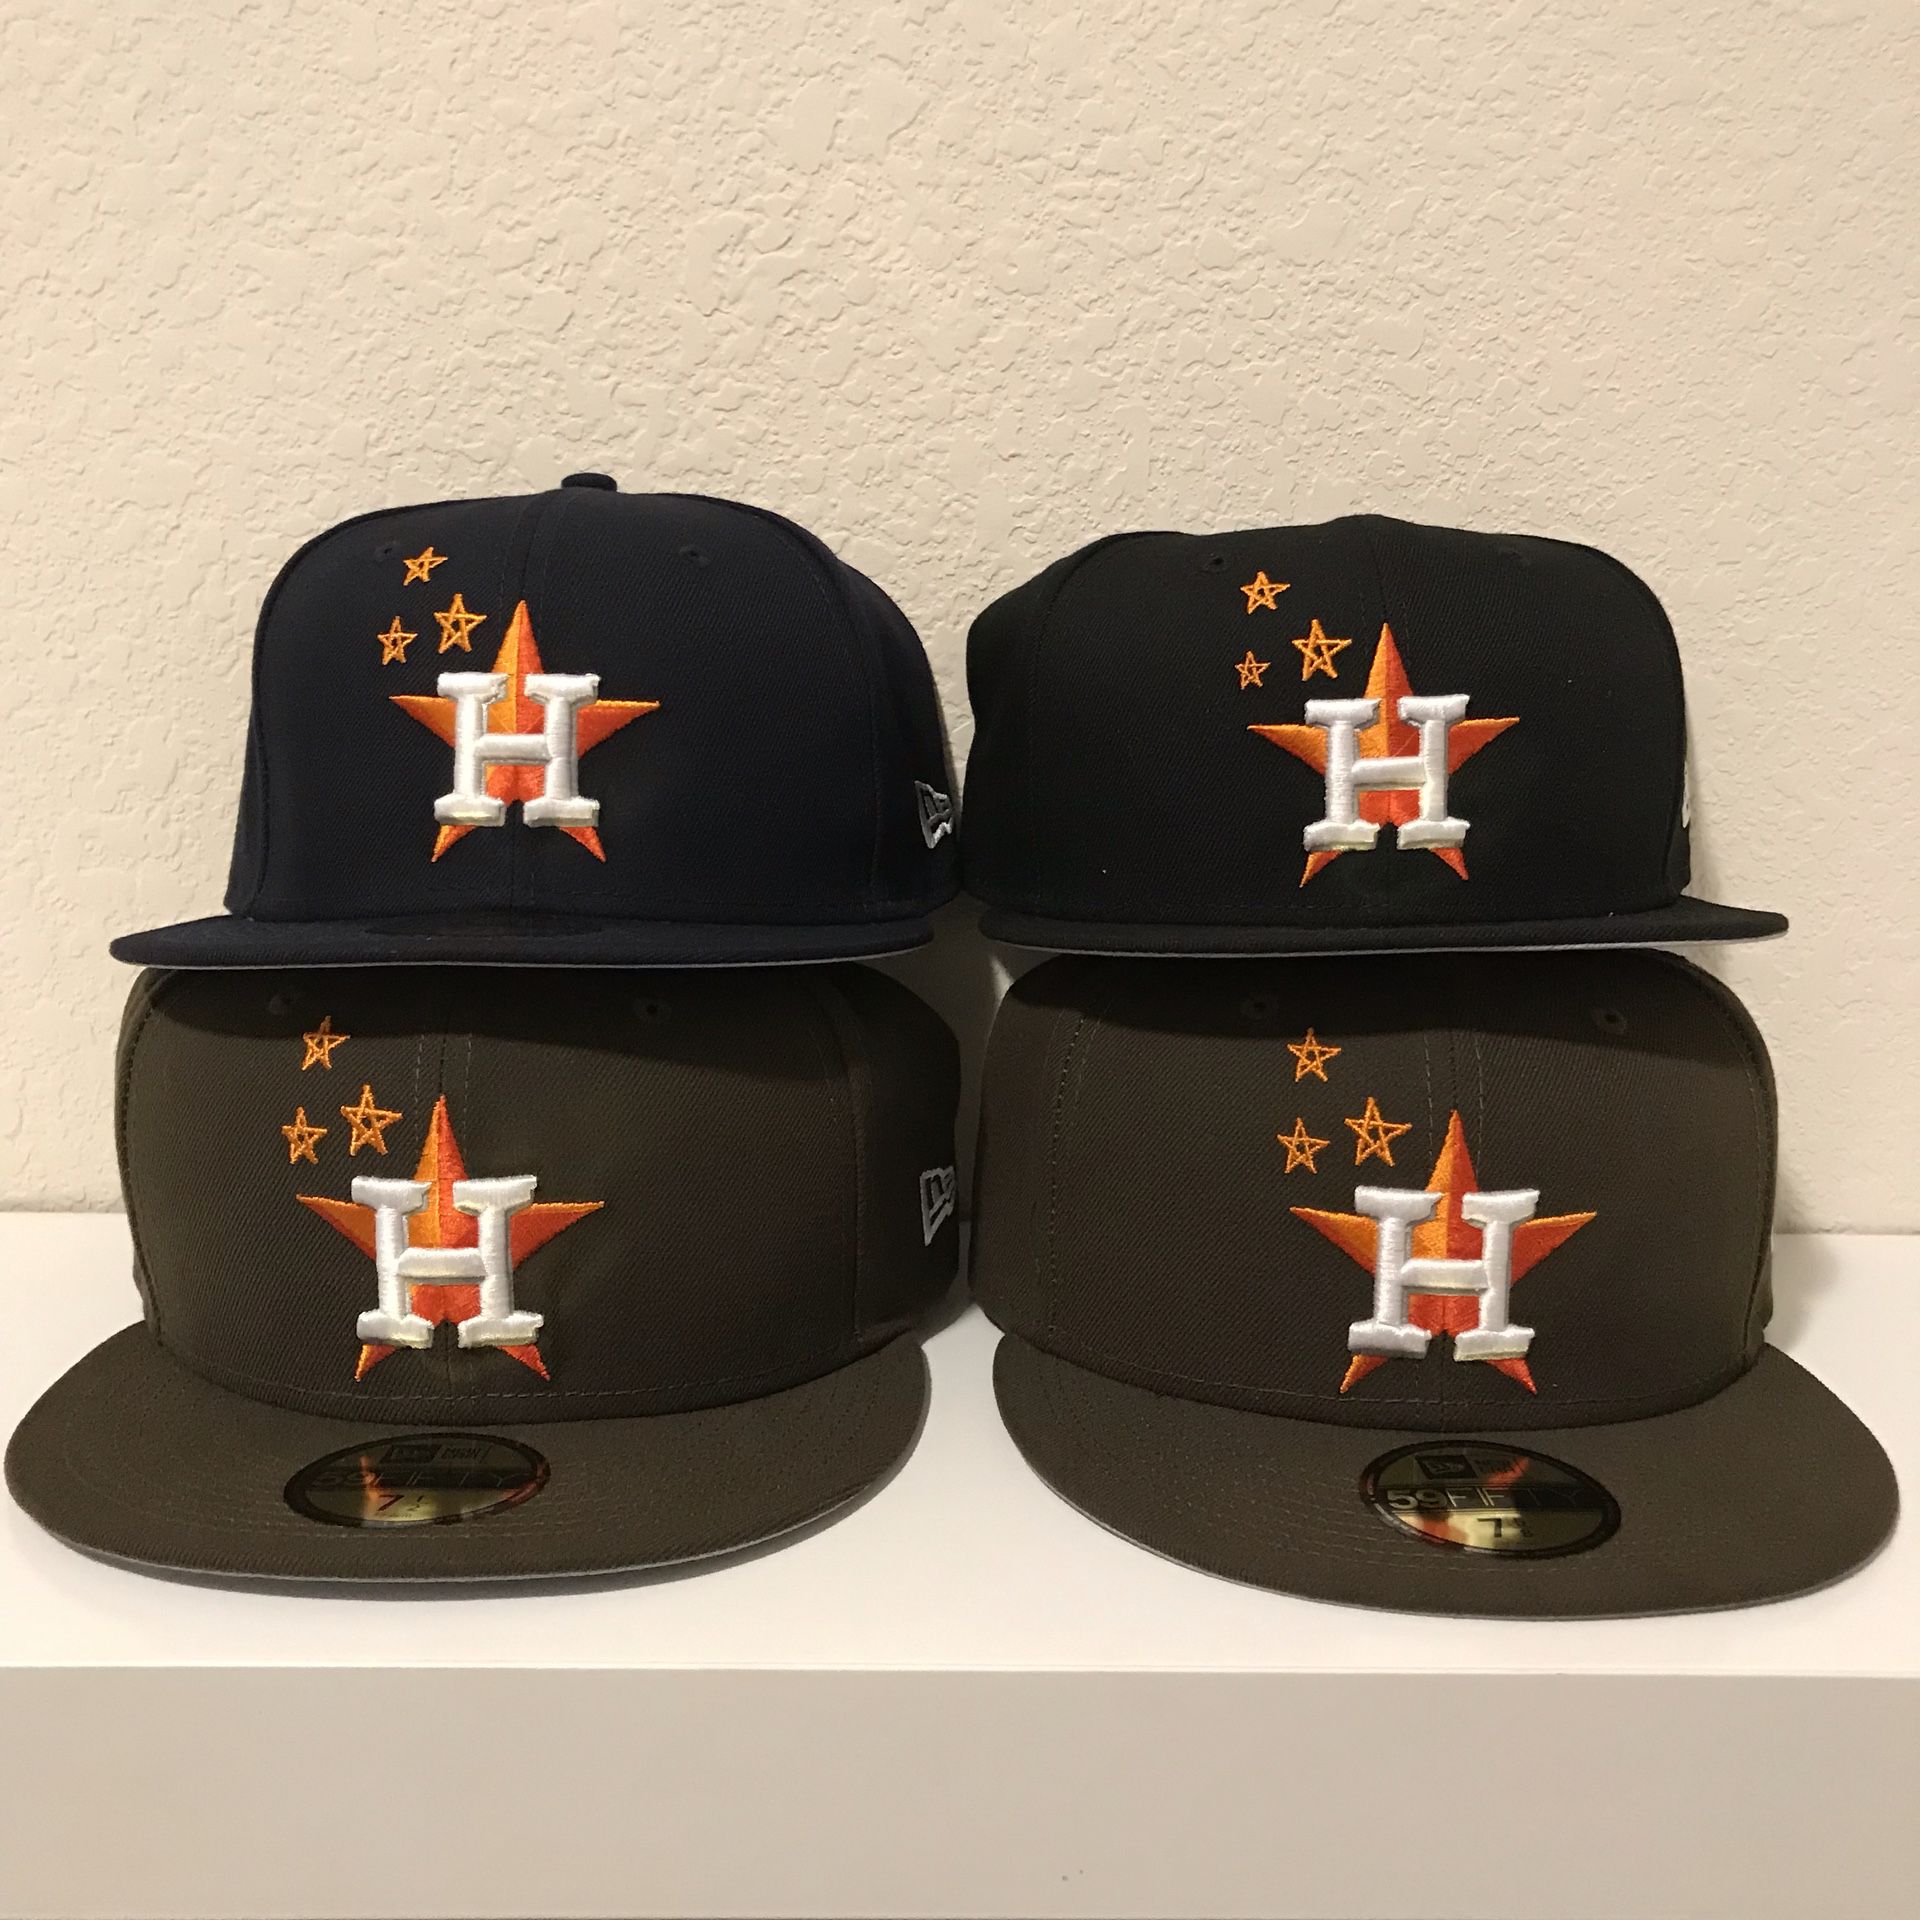 Travis Scott x Houston Astros 59Fifty Fitted Brown